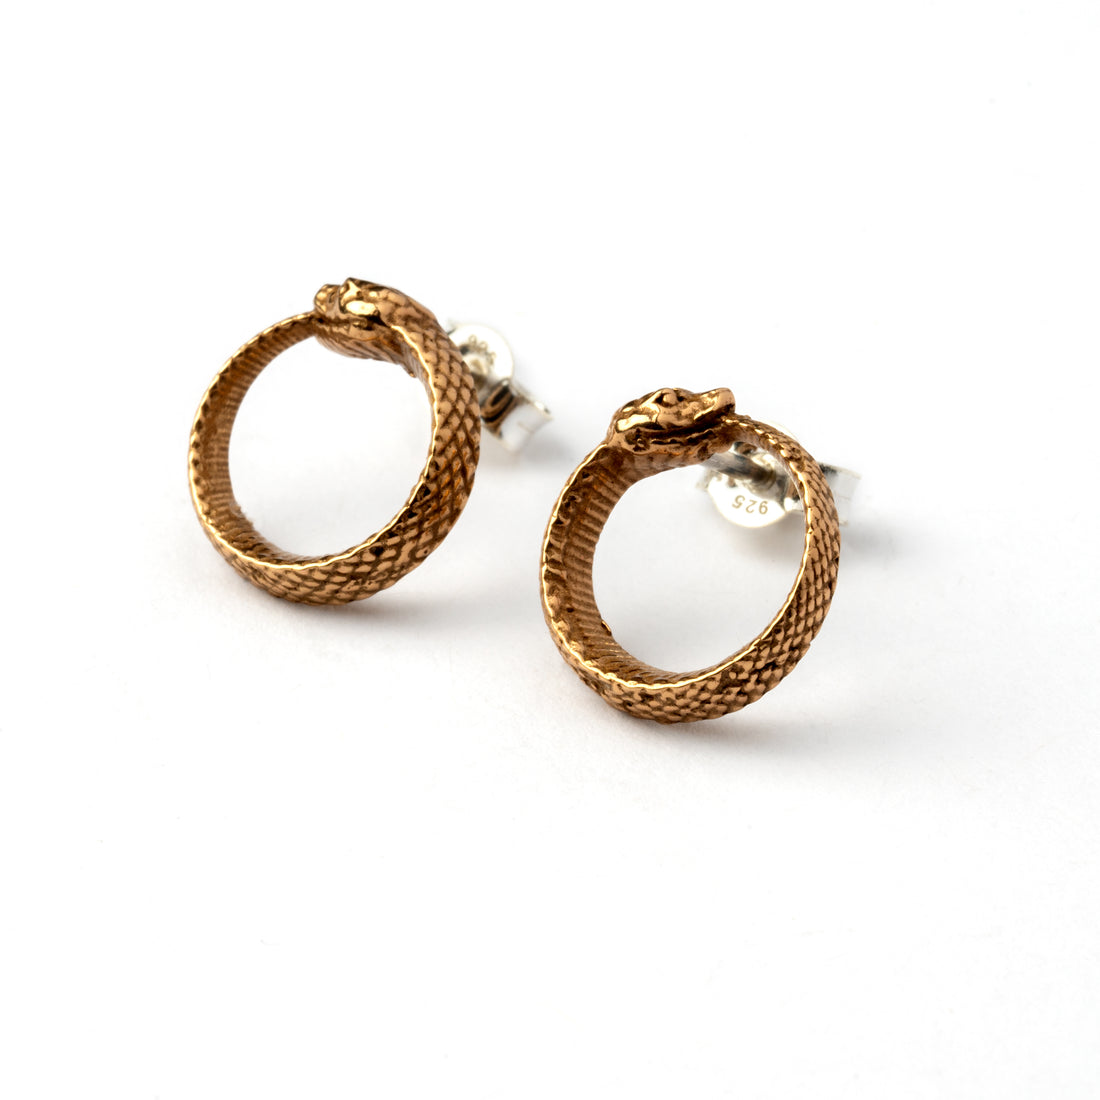 Ouroboros snake Bronze Ear Studs right side view